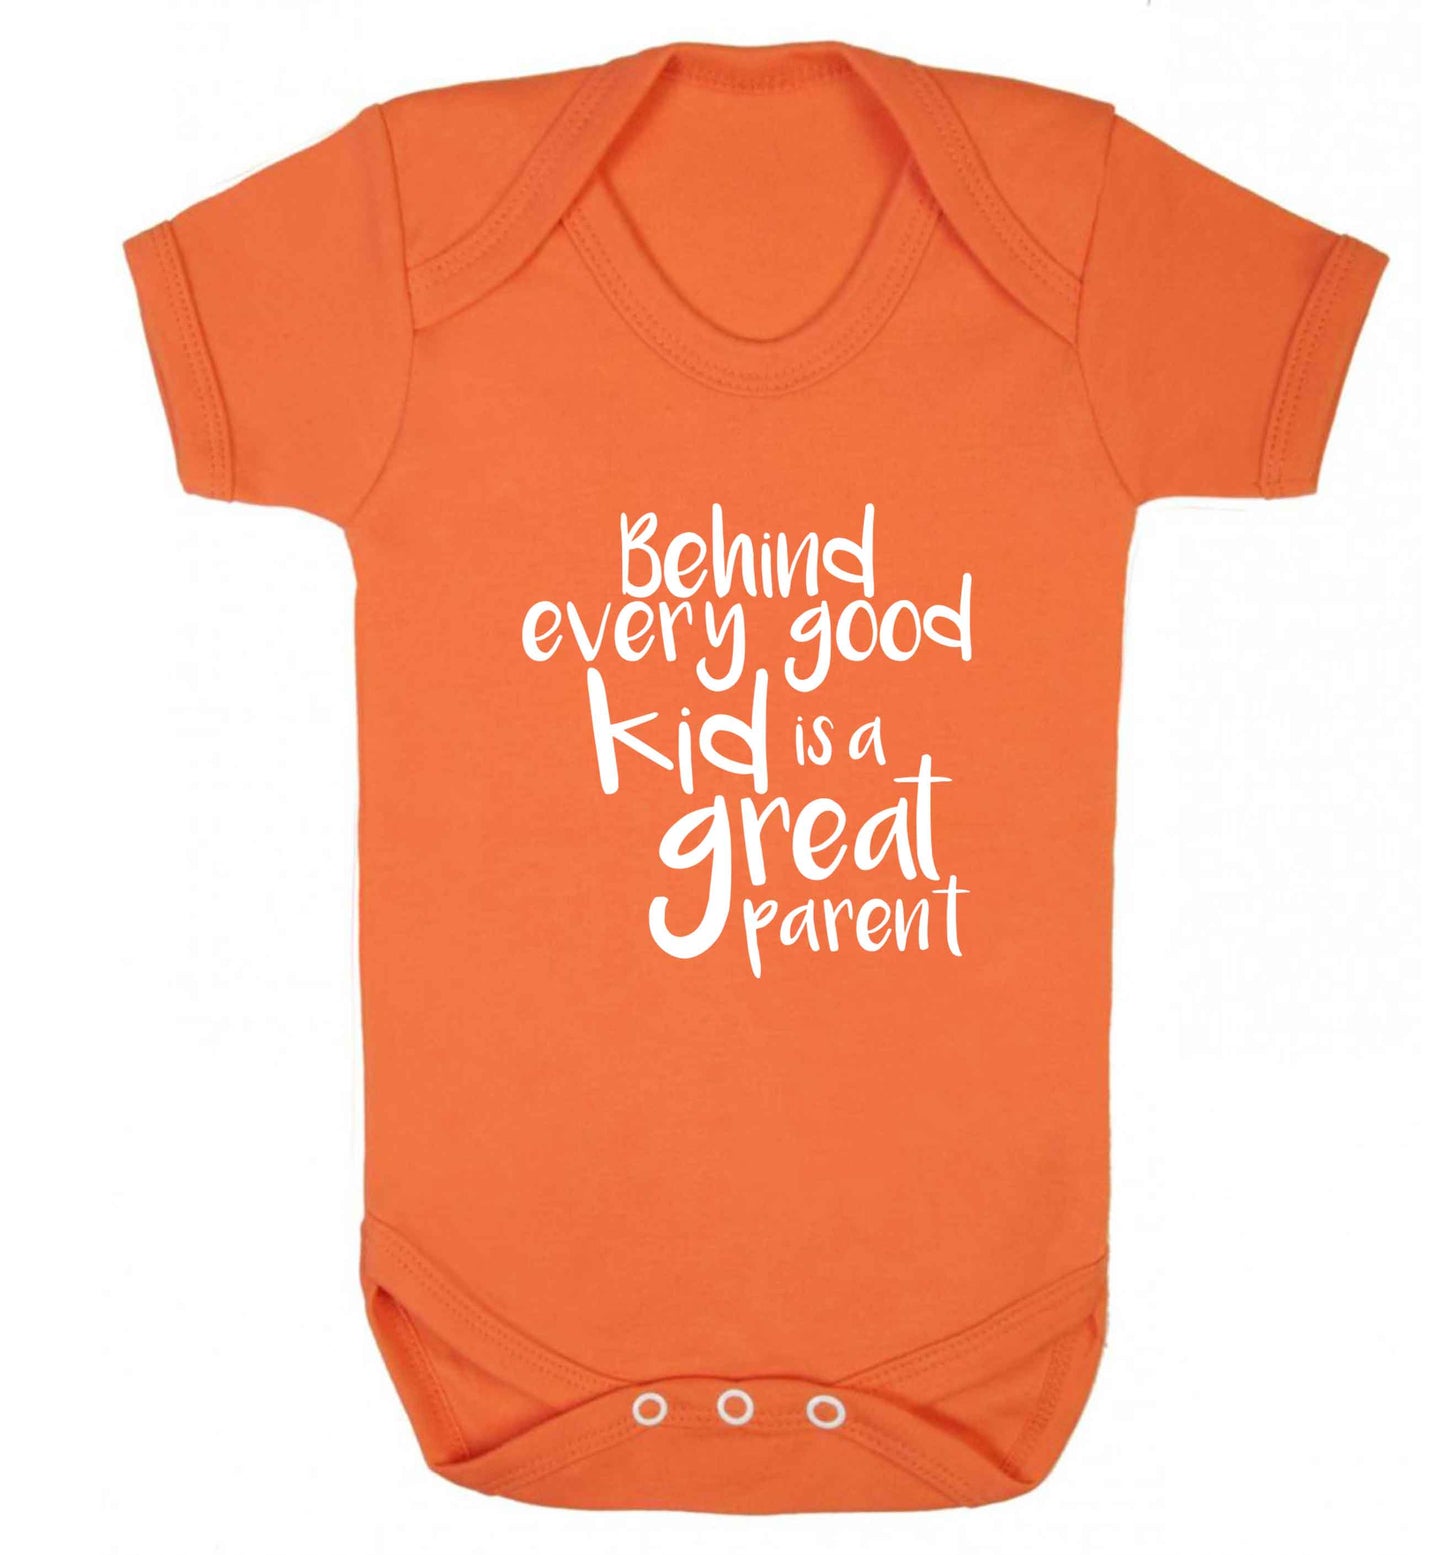 Behind every good kid is a great parent baby vest orange 18-24 months